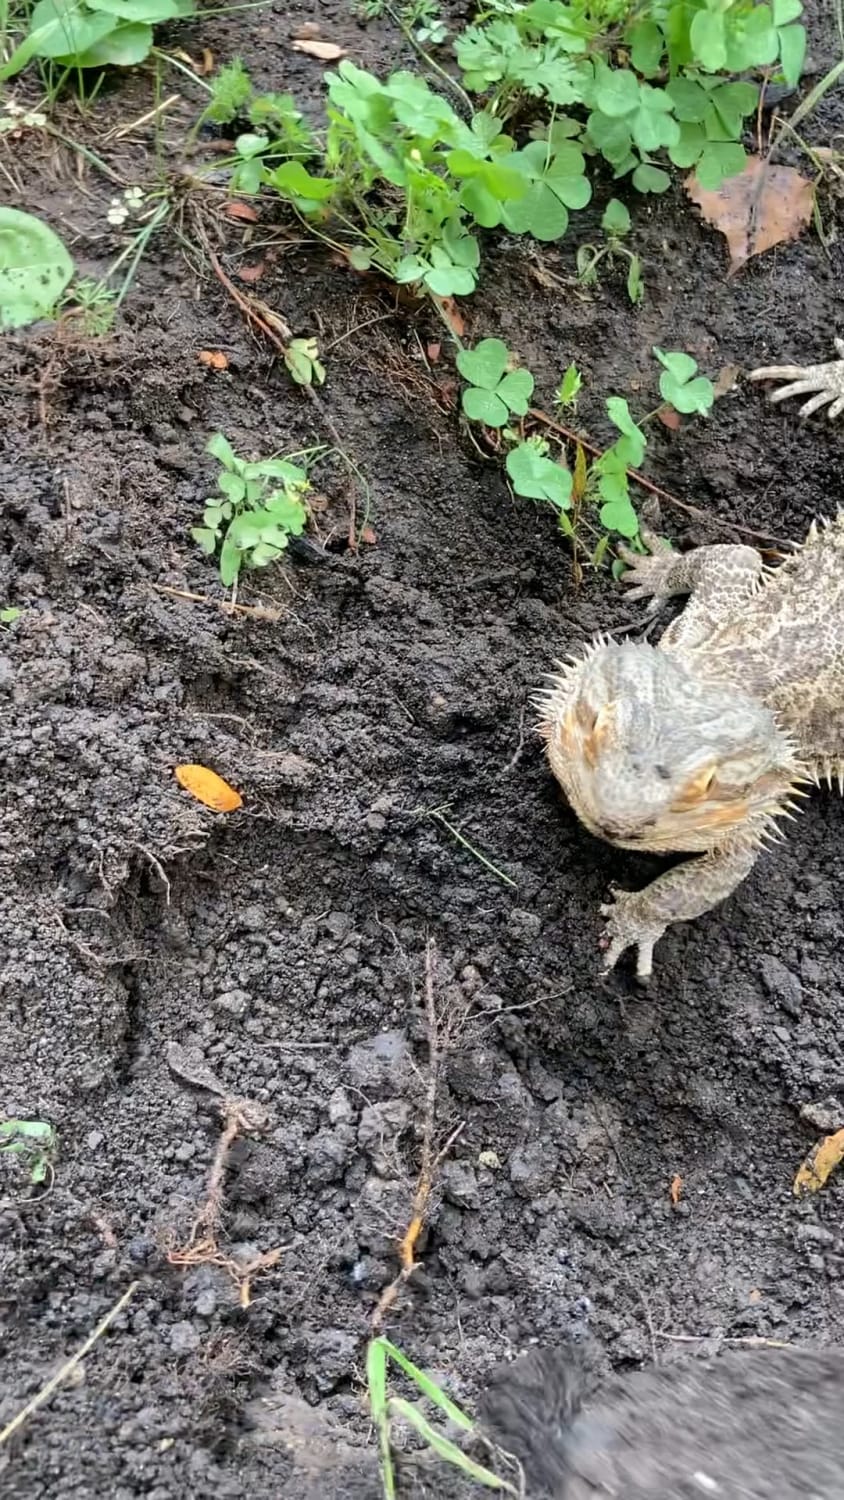 My buddy wanted to help me in the garden